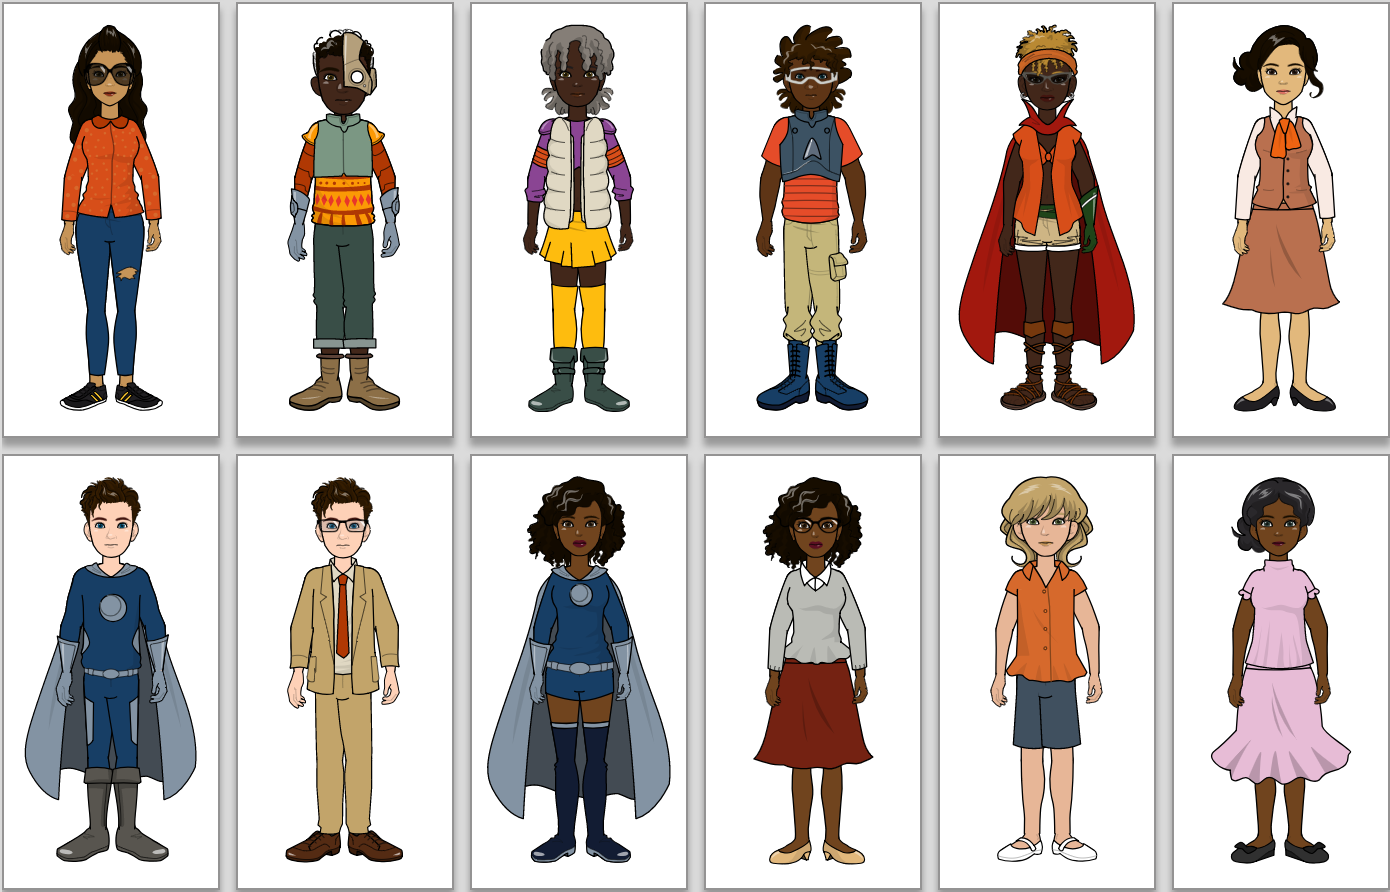 Image shows examples of characters that students could craft a story around.